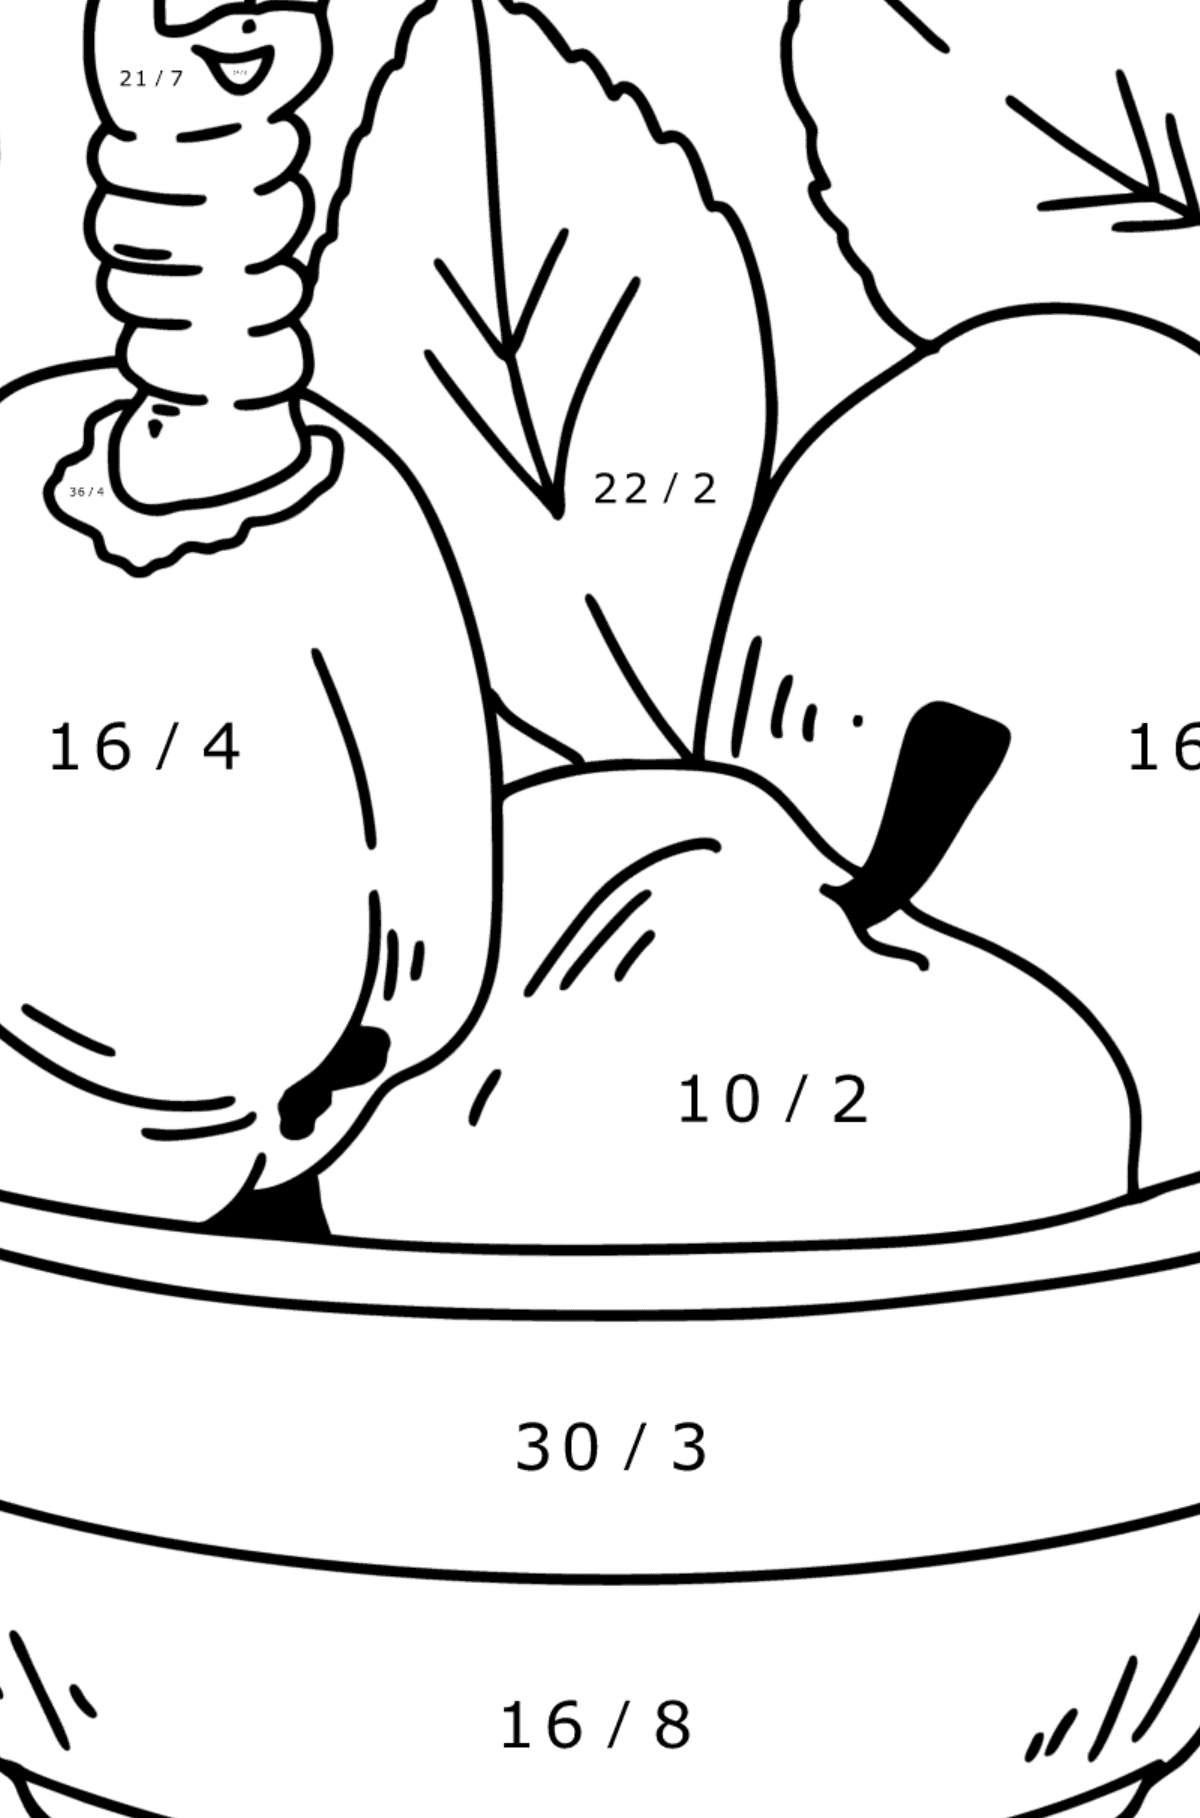 Coloring page Autumn - Apples and Сaterpillar - Math Coloring - Division for Kids